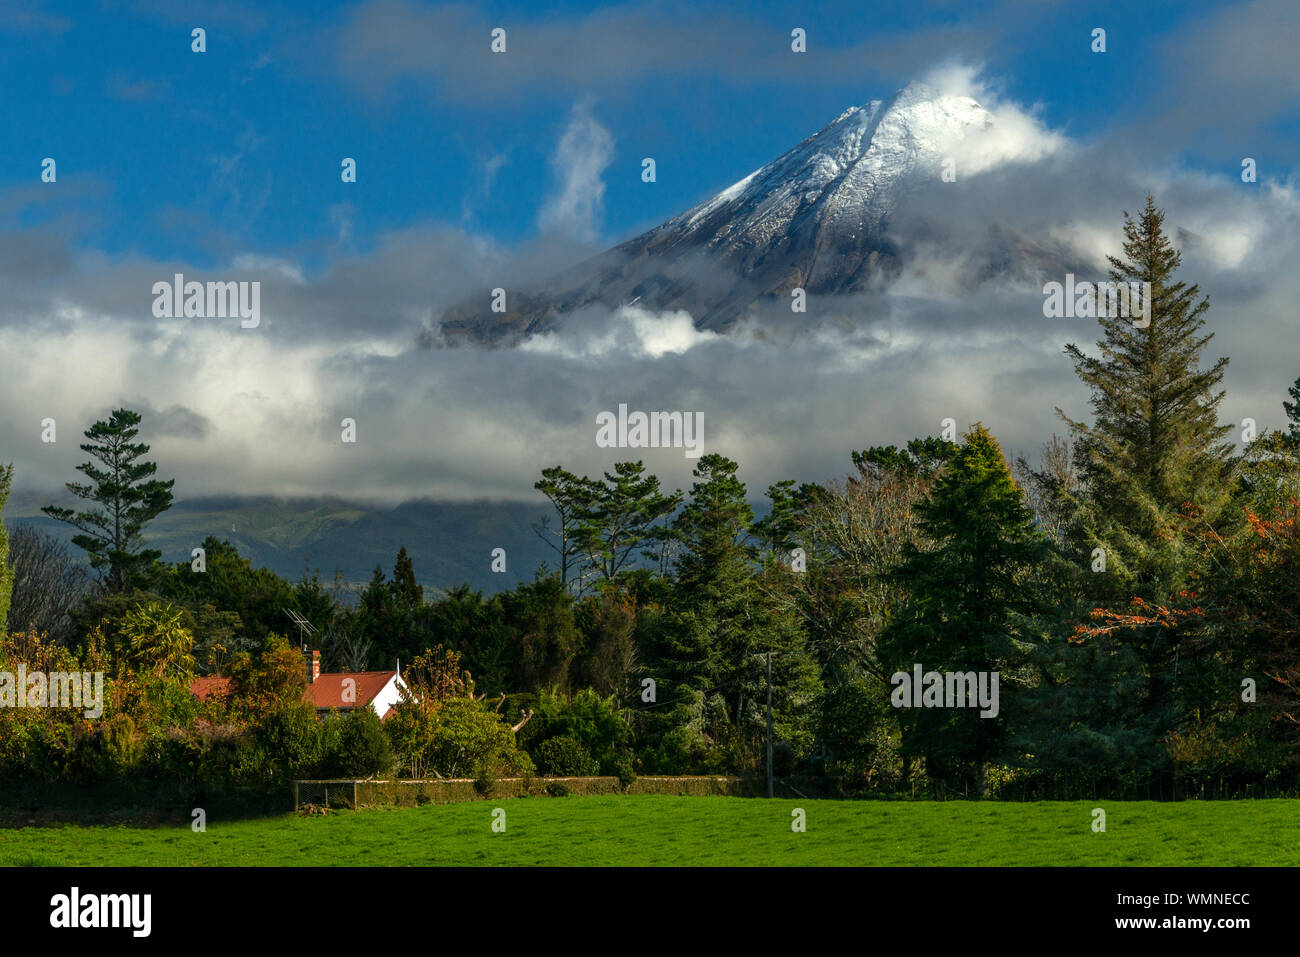 Light snow and whips clouds on the peak of Mt Taranaki (formerly Mt Egmont), a volcano in the north island of New Zealand. Stock Photo